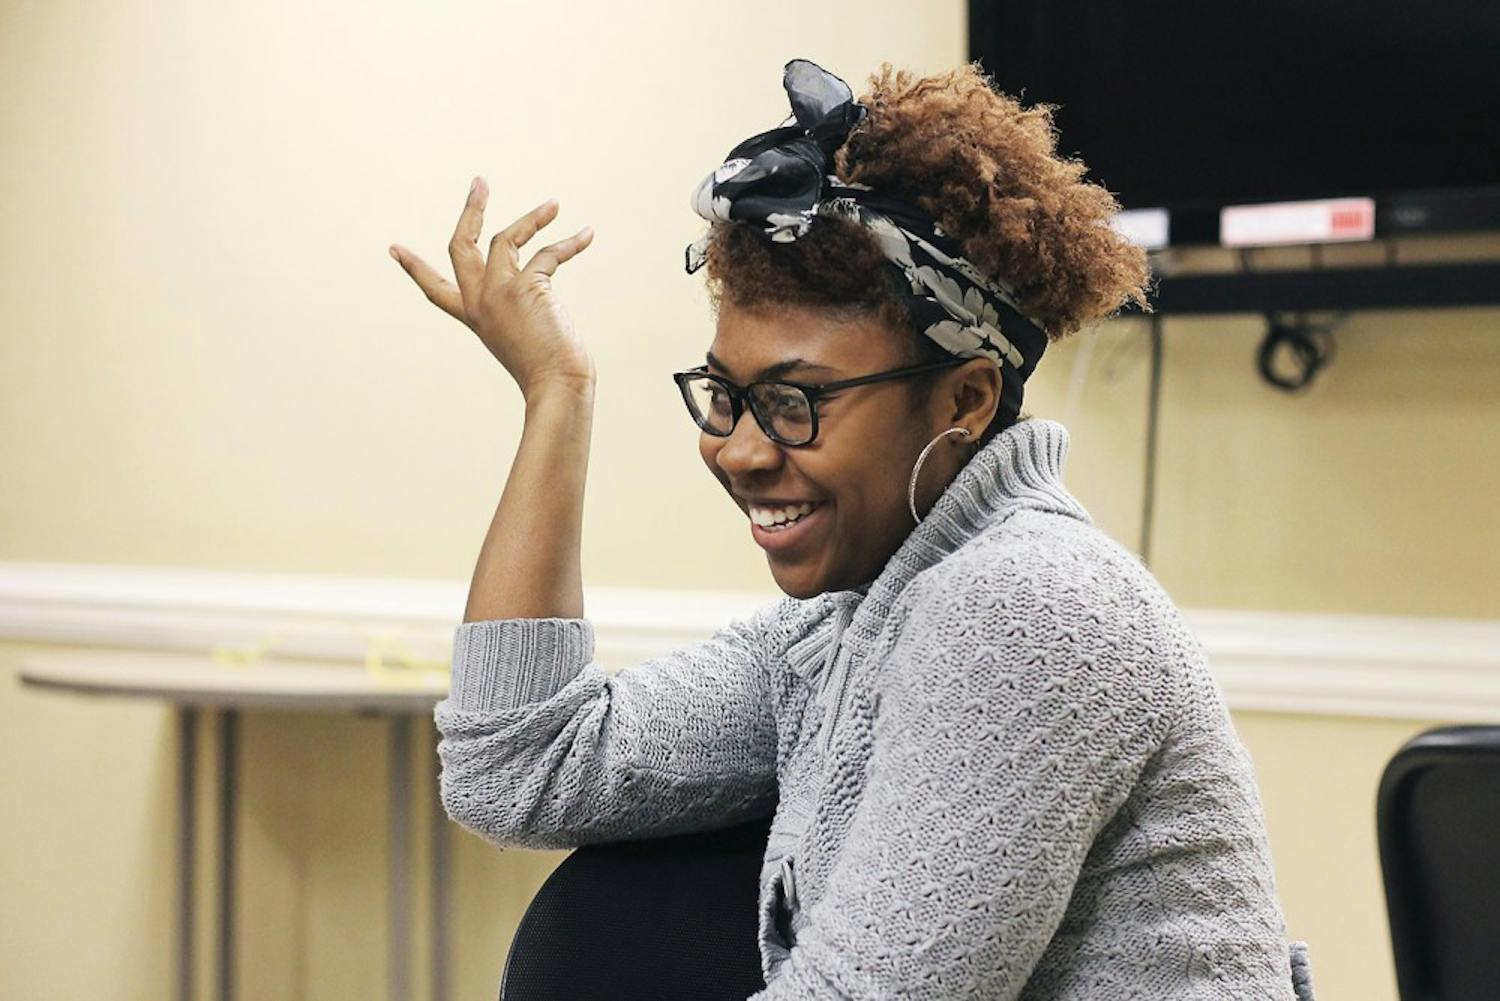 Cipryana Mack, a sophomore EXSS major, leads a discussion following a screening of the film "Dear White People" hosted by the UNC Black Student Movement at Ram Village on Friday.